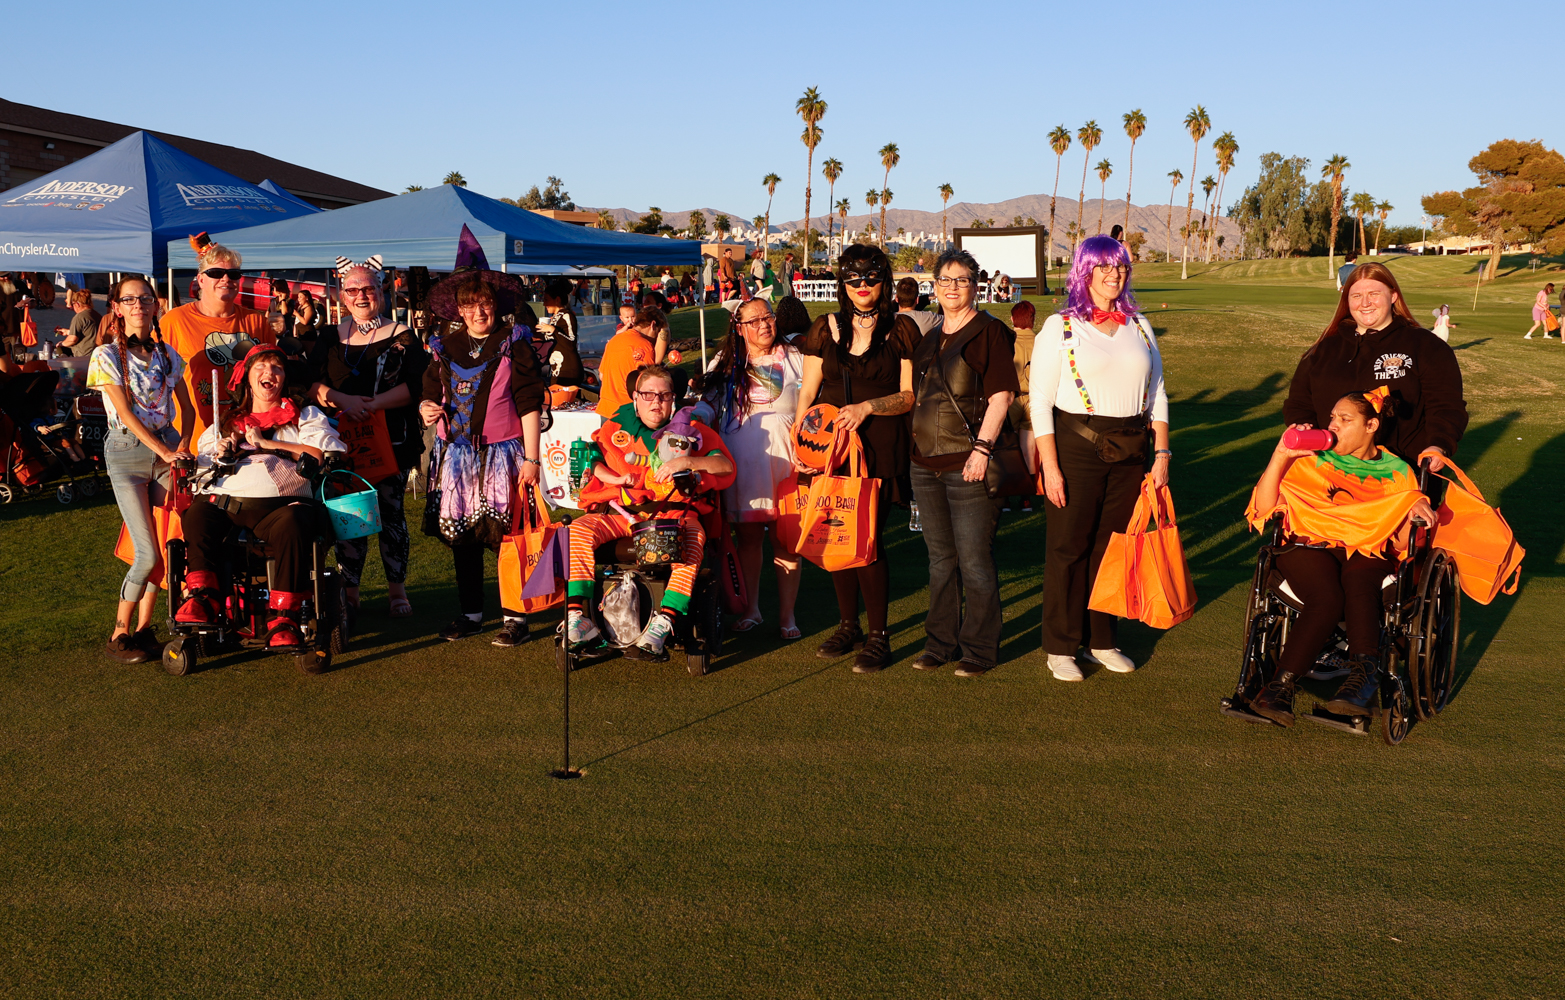 Annual Adaptive Boo Bash Event Provides Fun Activities For All Abilities